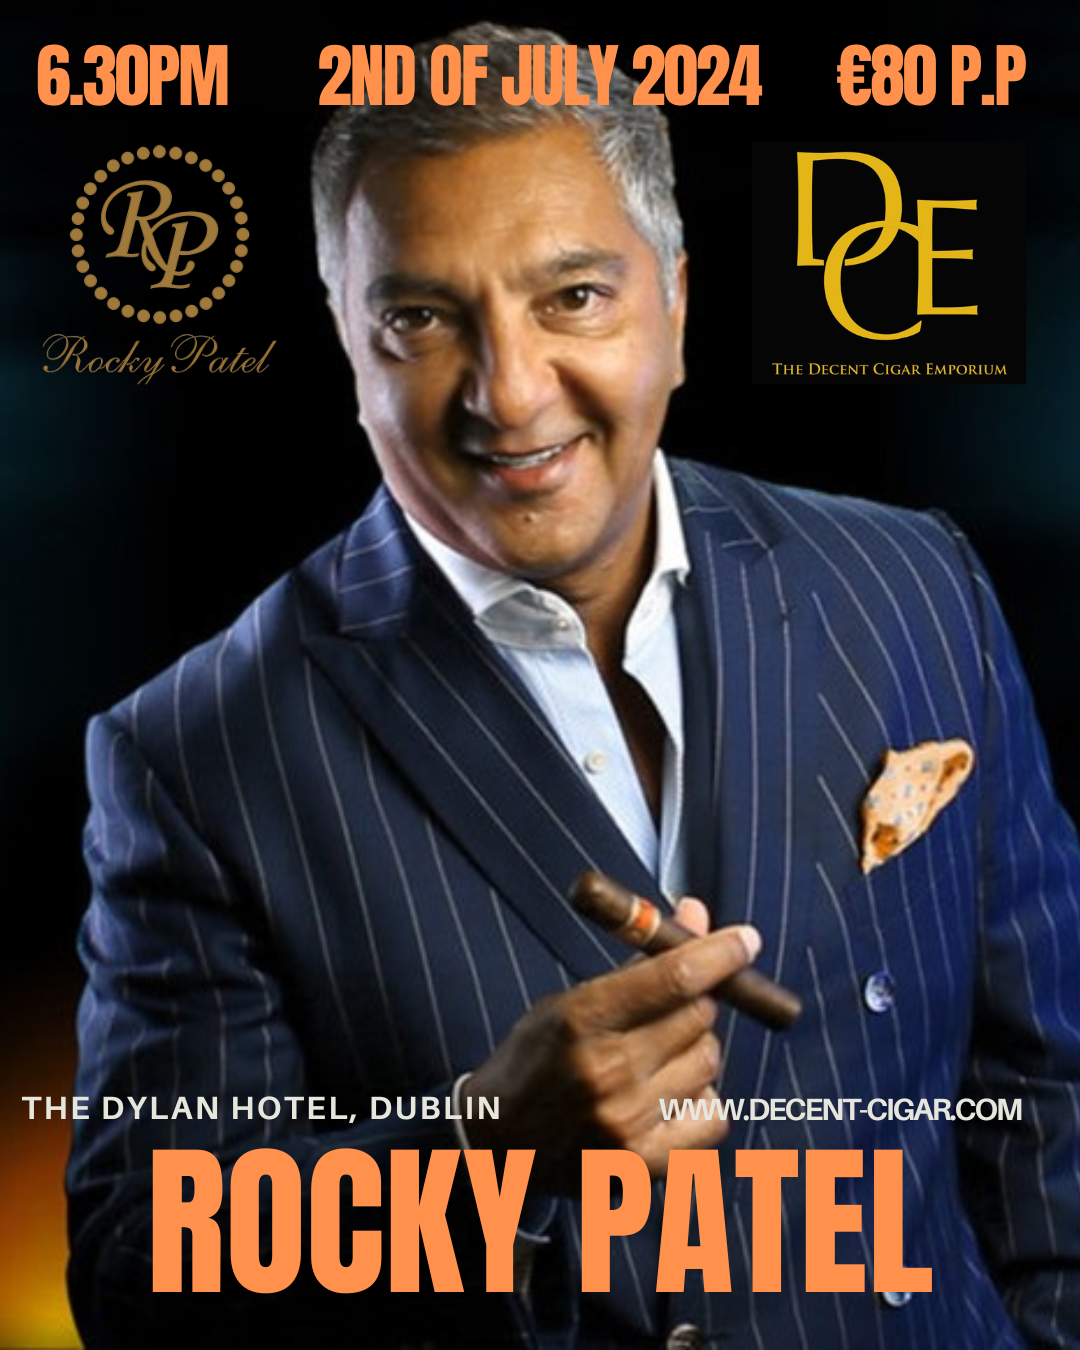 Decent Cigar Event - Rocky Patel 2nd of July 2024 SOLD OUT!